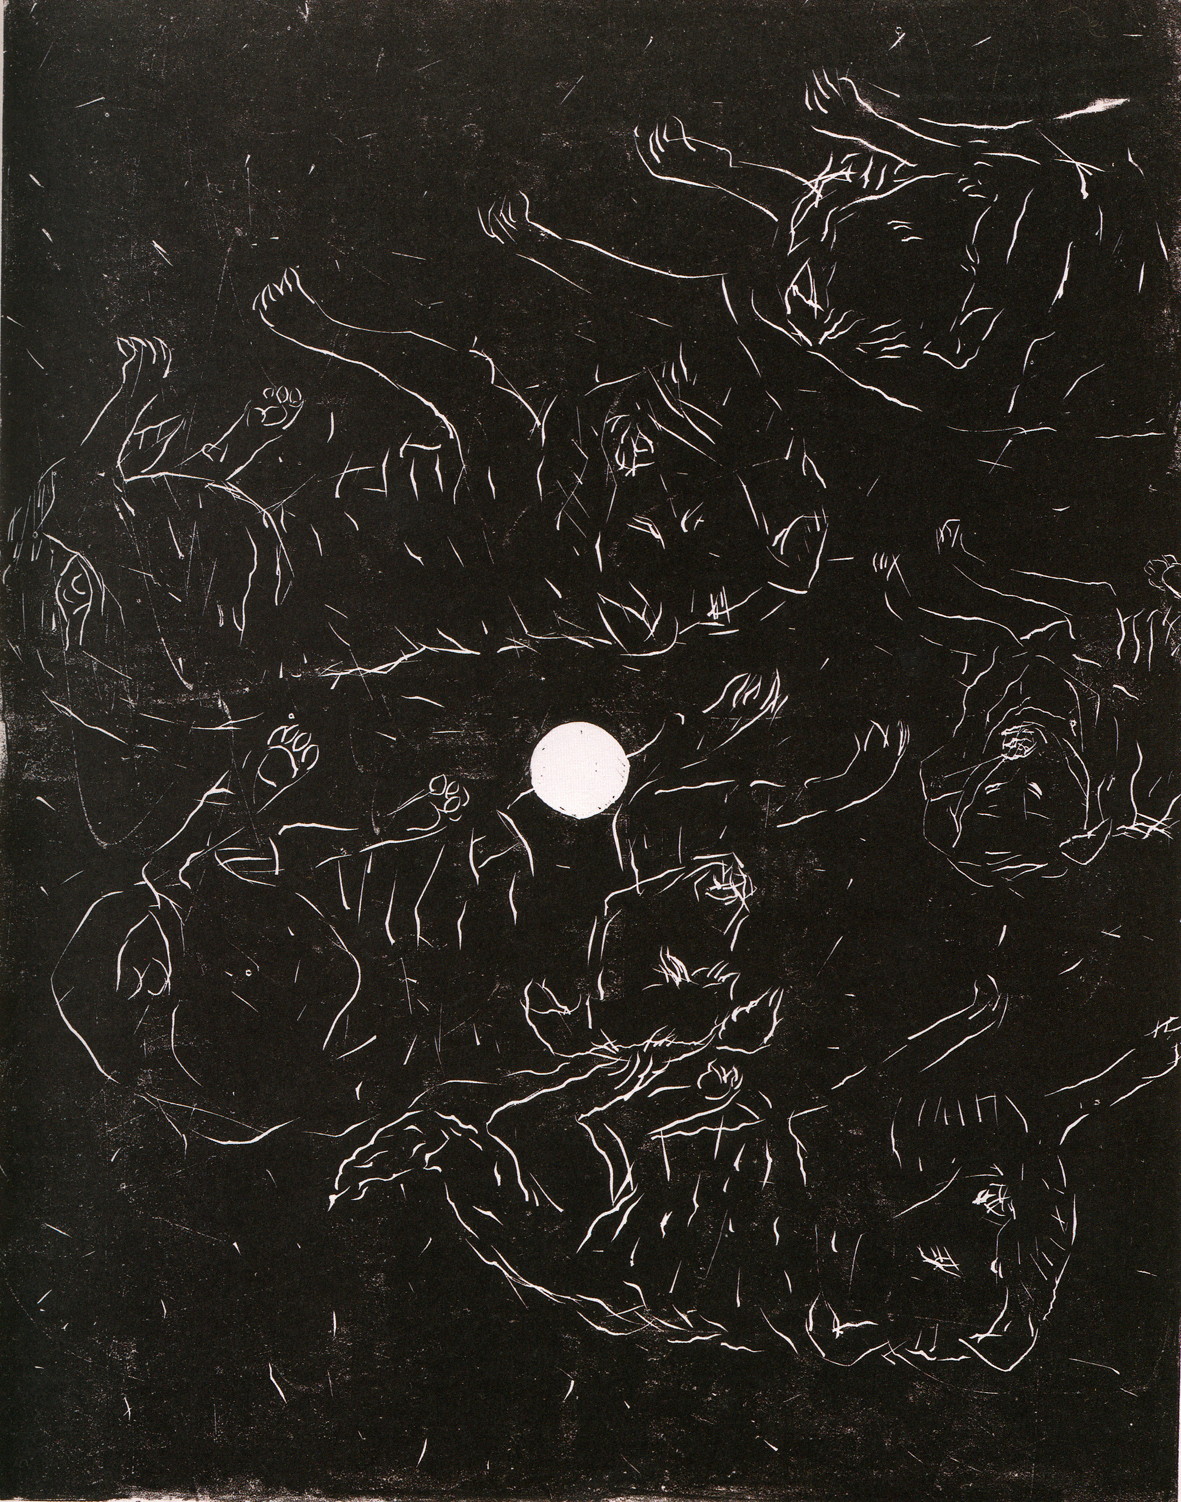 Fnf Hunde [Cinq chiens], 1999